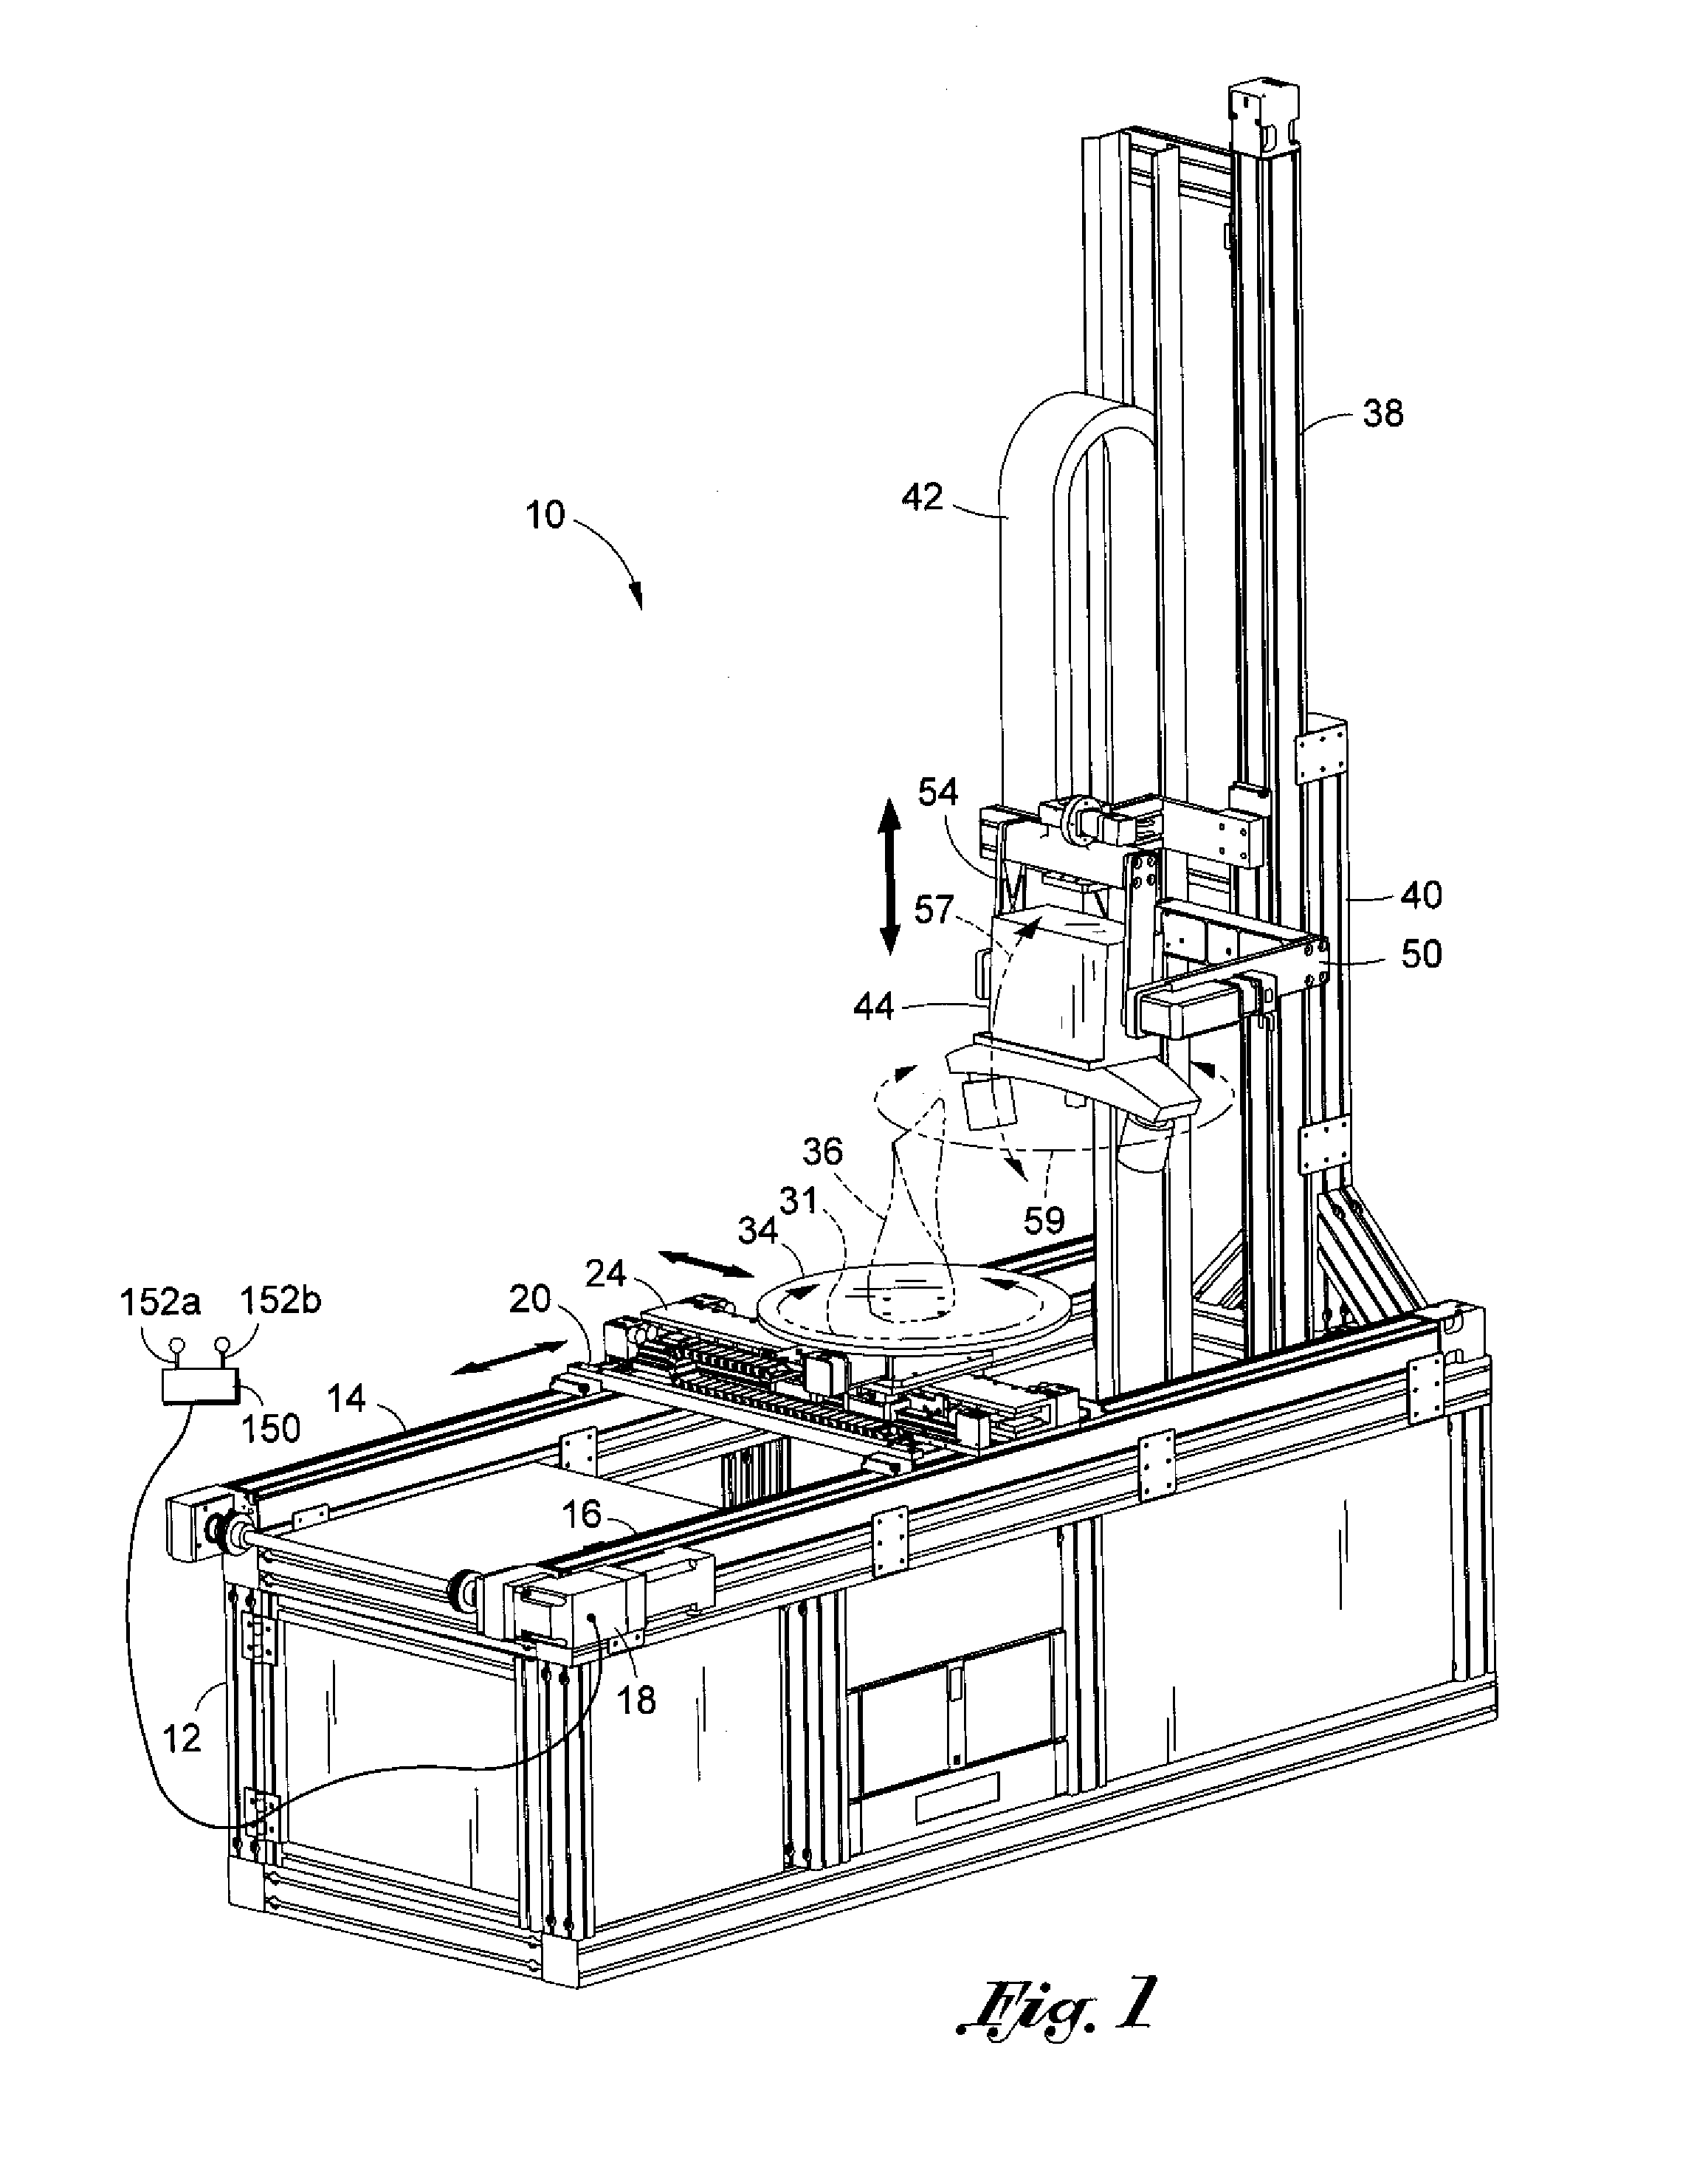 Six axis motion control apparatus